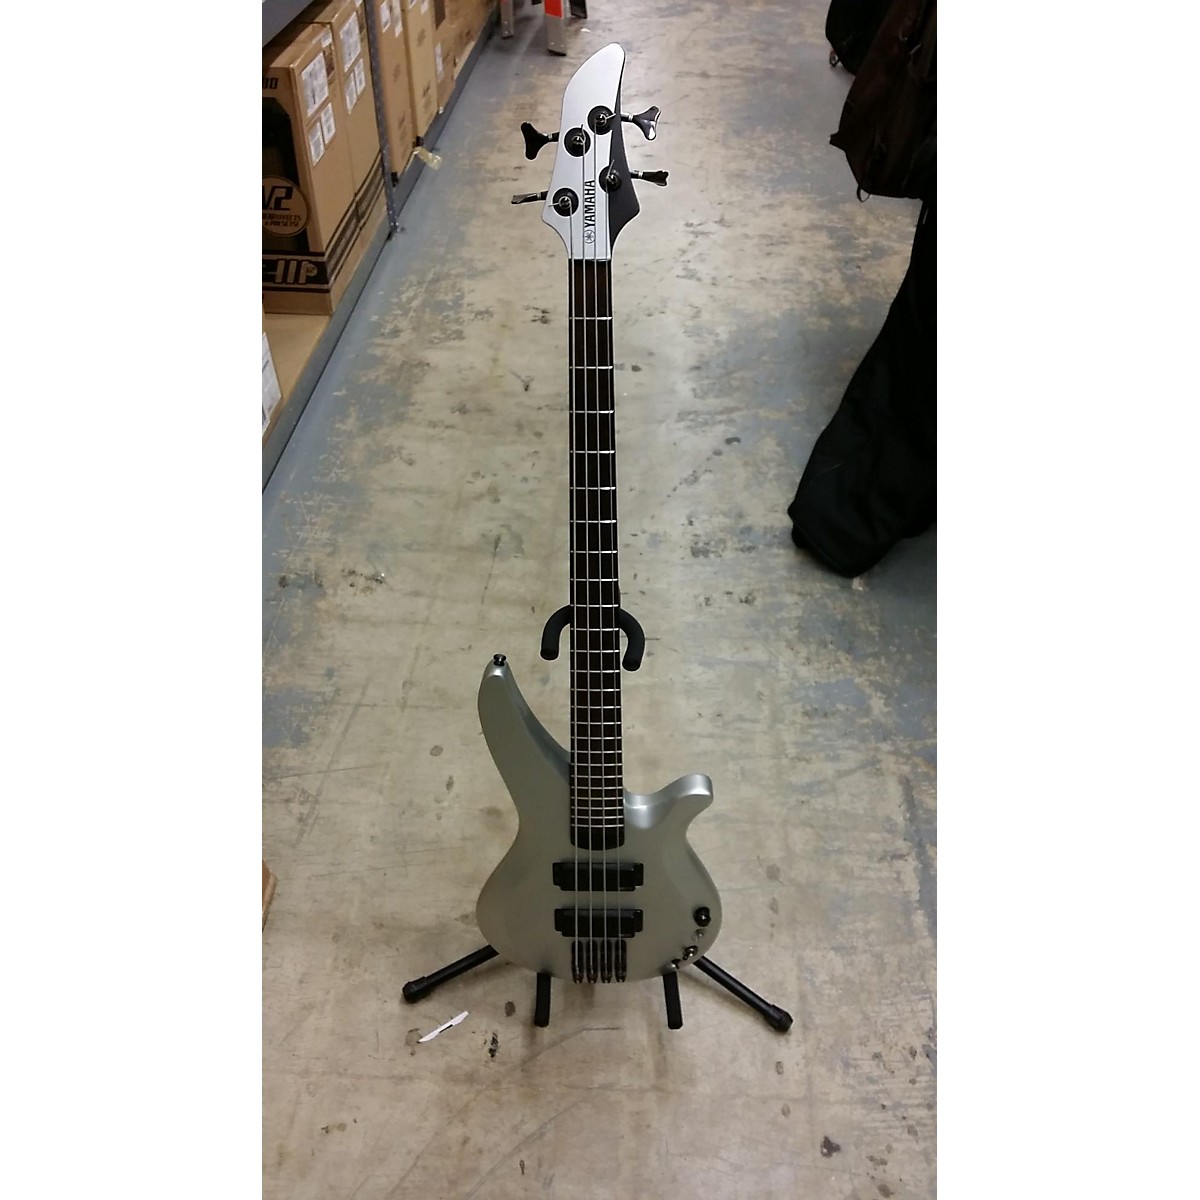 Used Rbx 774 Electric Bass Guitar Guitar Center - multi rbx download